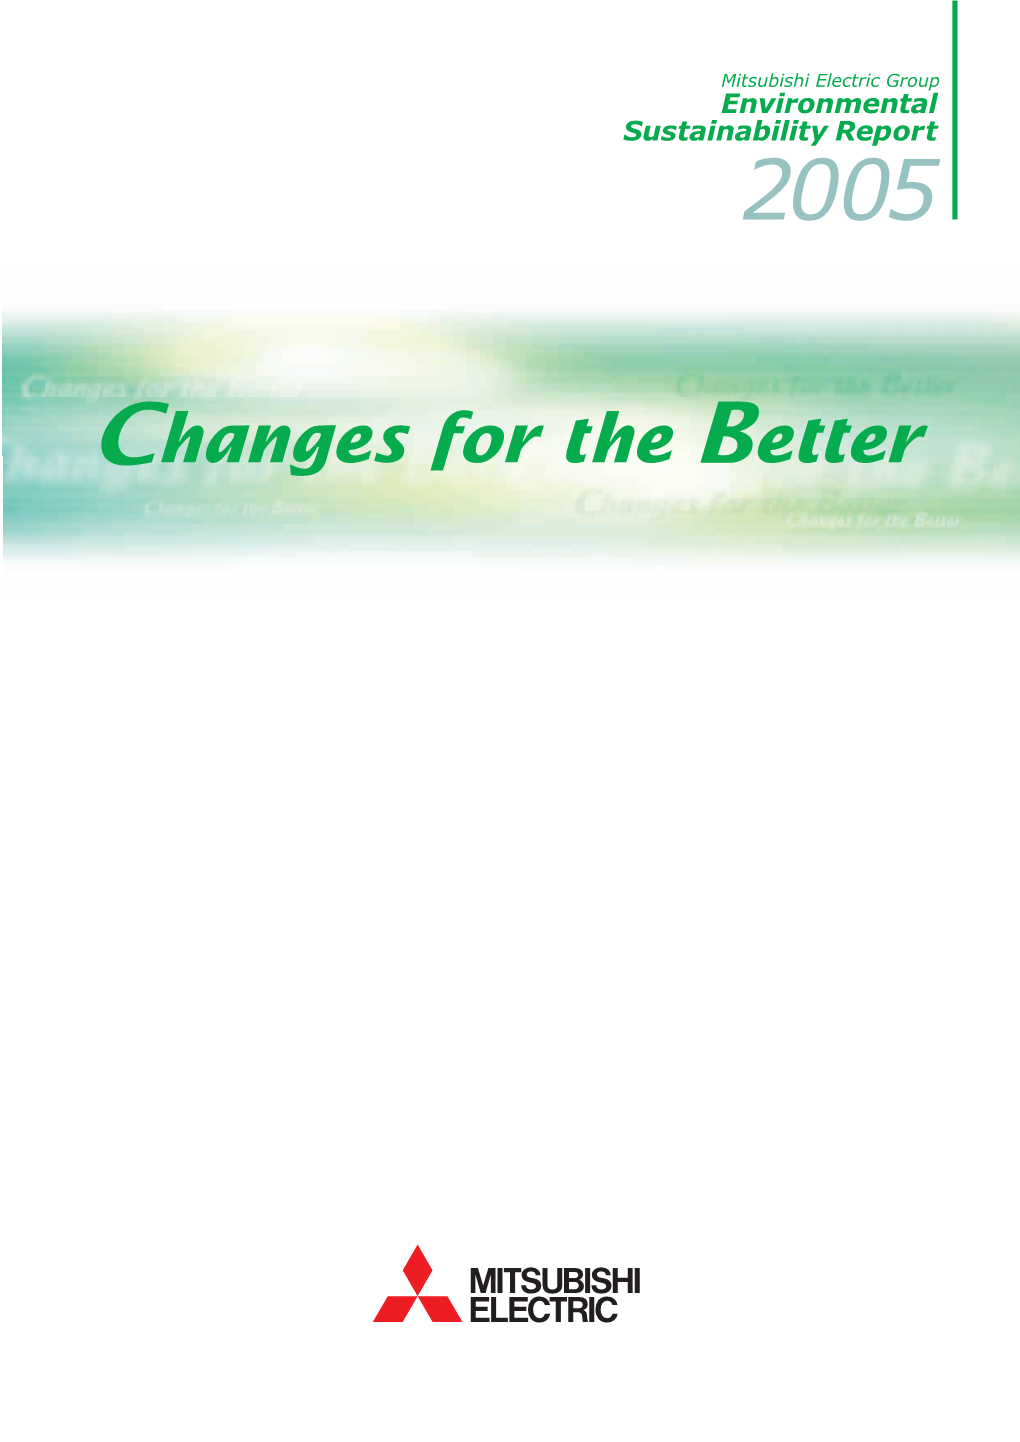 Environmental Sustainability Report 2005 Respect Nature, and Strive to Protect and Improve the Global Environment